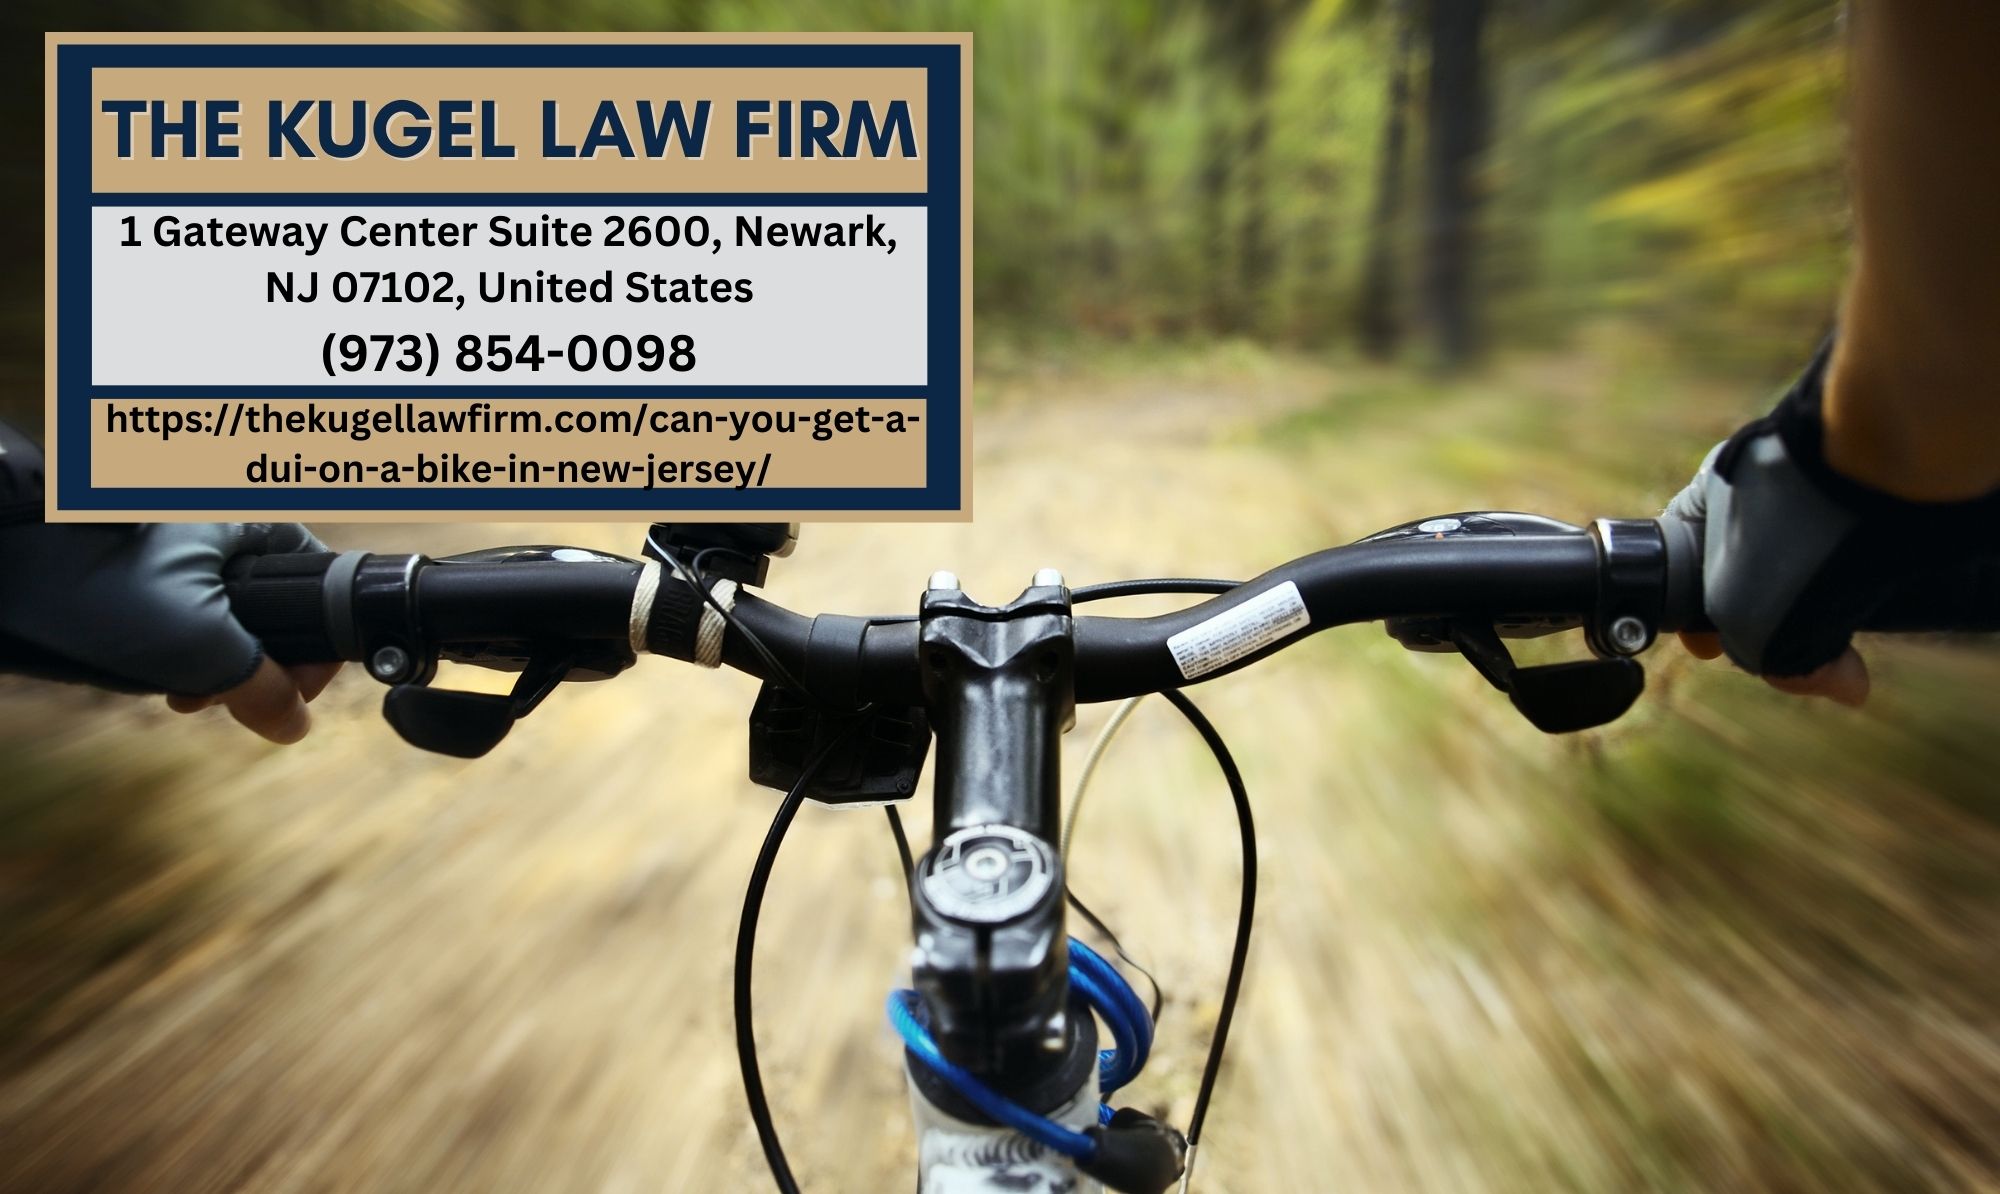 New Jersey DUI Lawyer Rachel Kugel Sheds Light on DUI Laws for Bicyclists in New Article